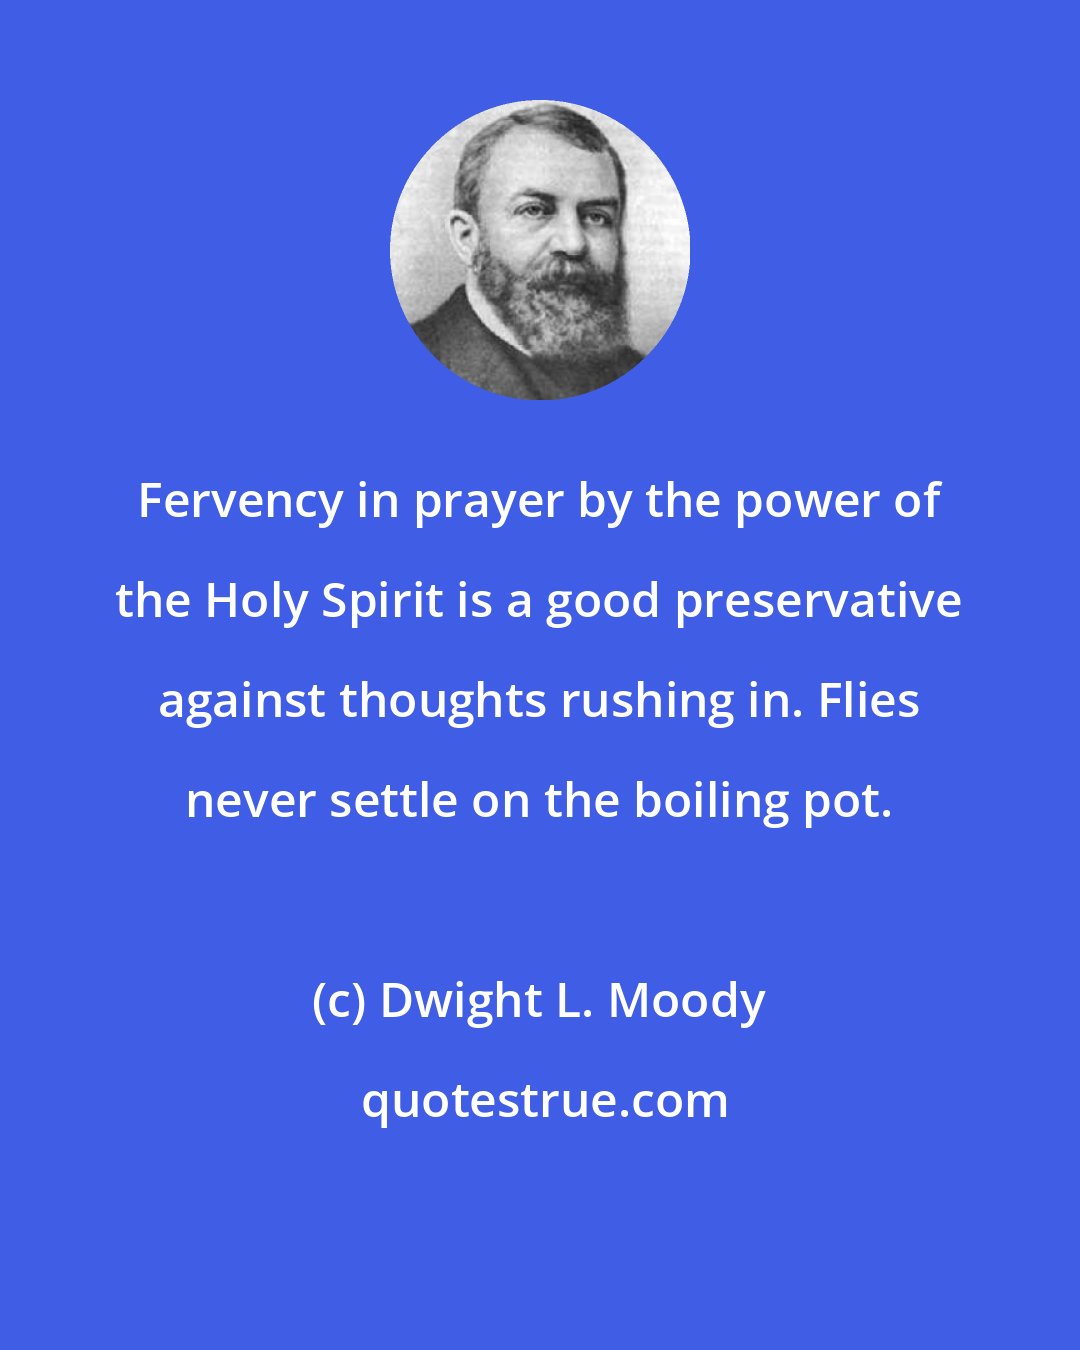 Dwight L. Moody: Fervency in prayer by the power of the Holy Spirit is a good preservative against thoughts rushing in. Flies never settle on the boiling pot.